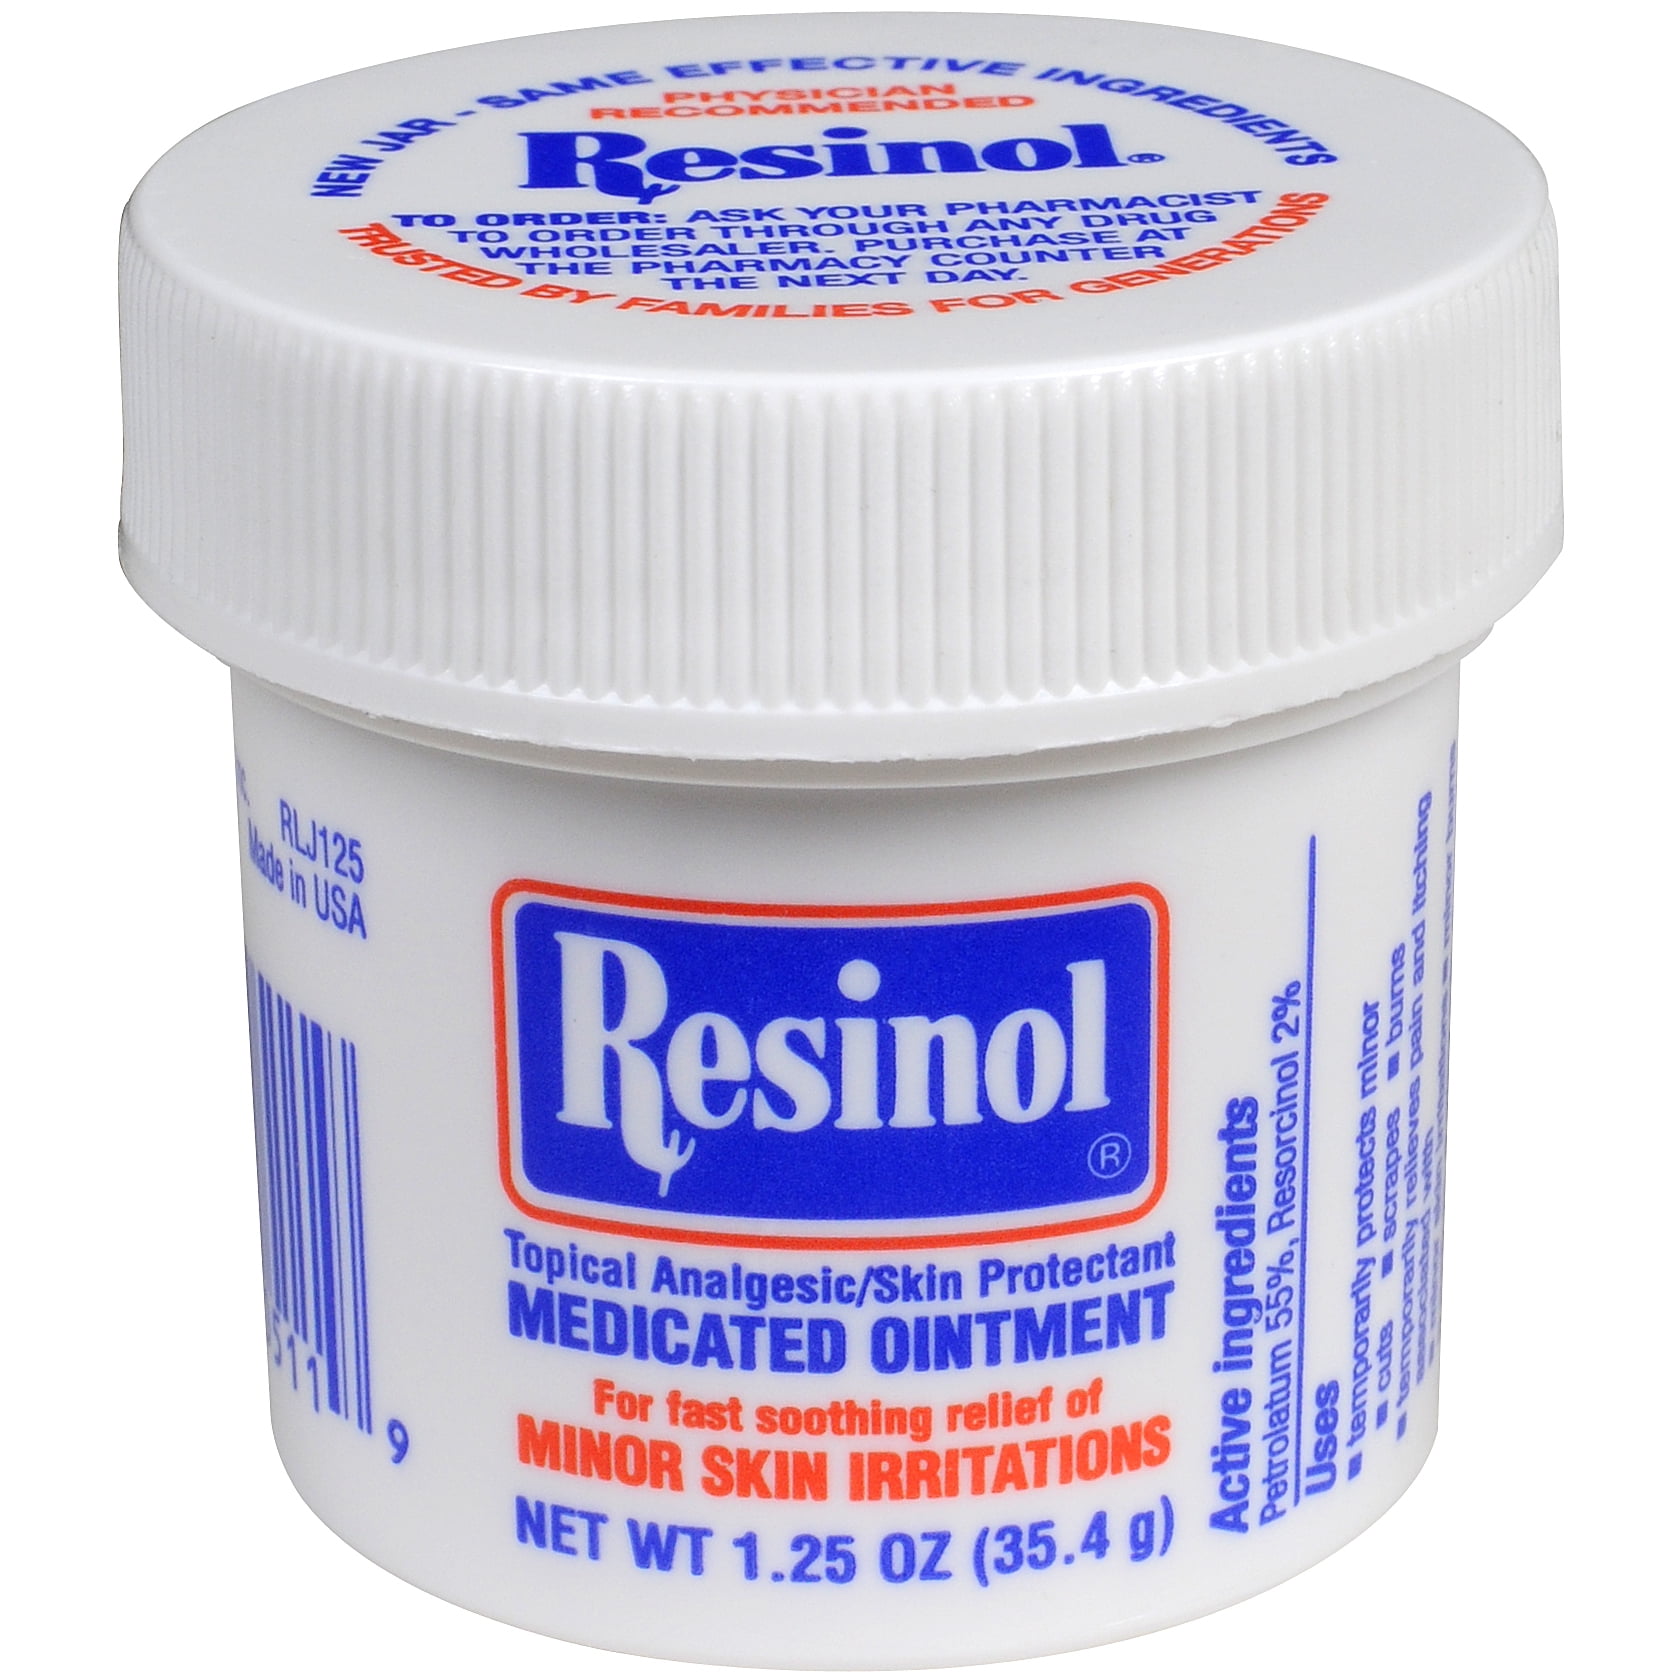 Choice Special Resinol Medicated Ointment Jar, 3.3 Ounce